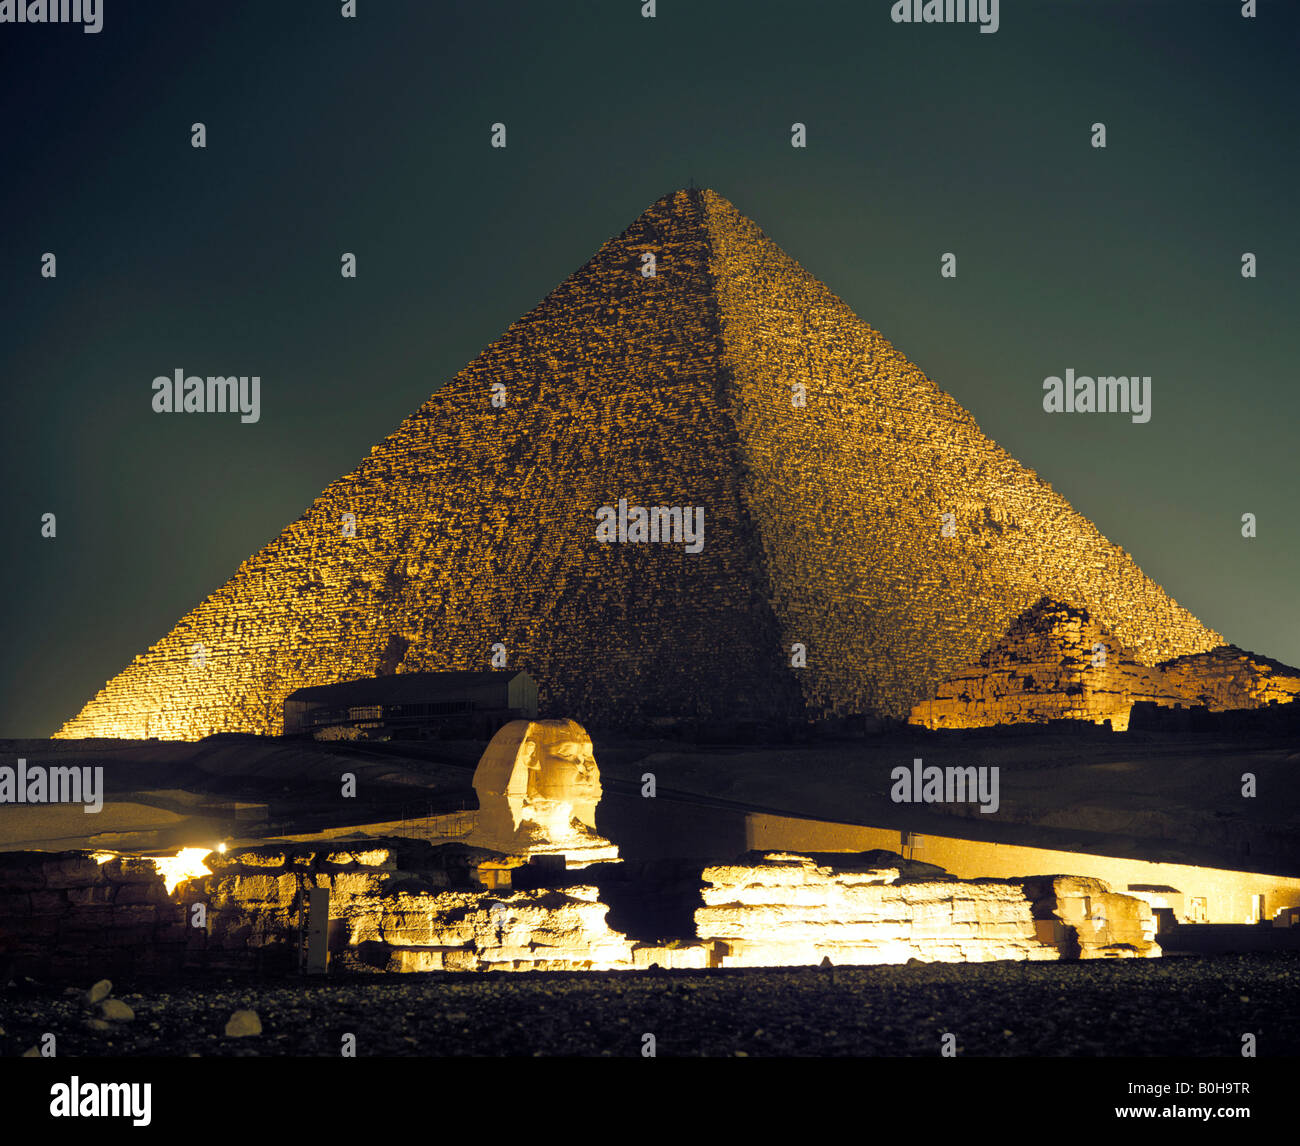 Picture of the Giza pyramid complex at night, Great Pyramid of Giza, Sphinx, Cairo, Egypt Stock Photo